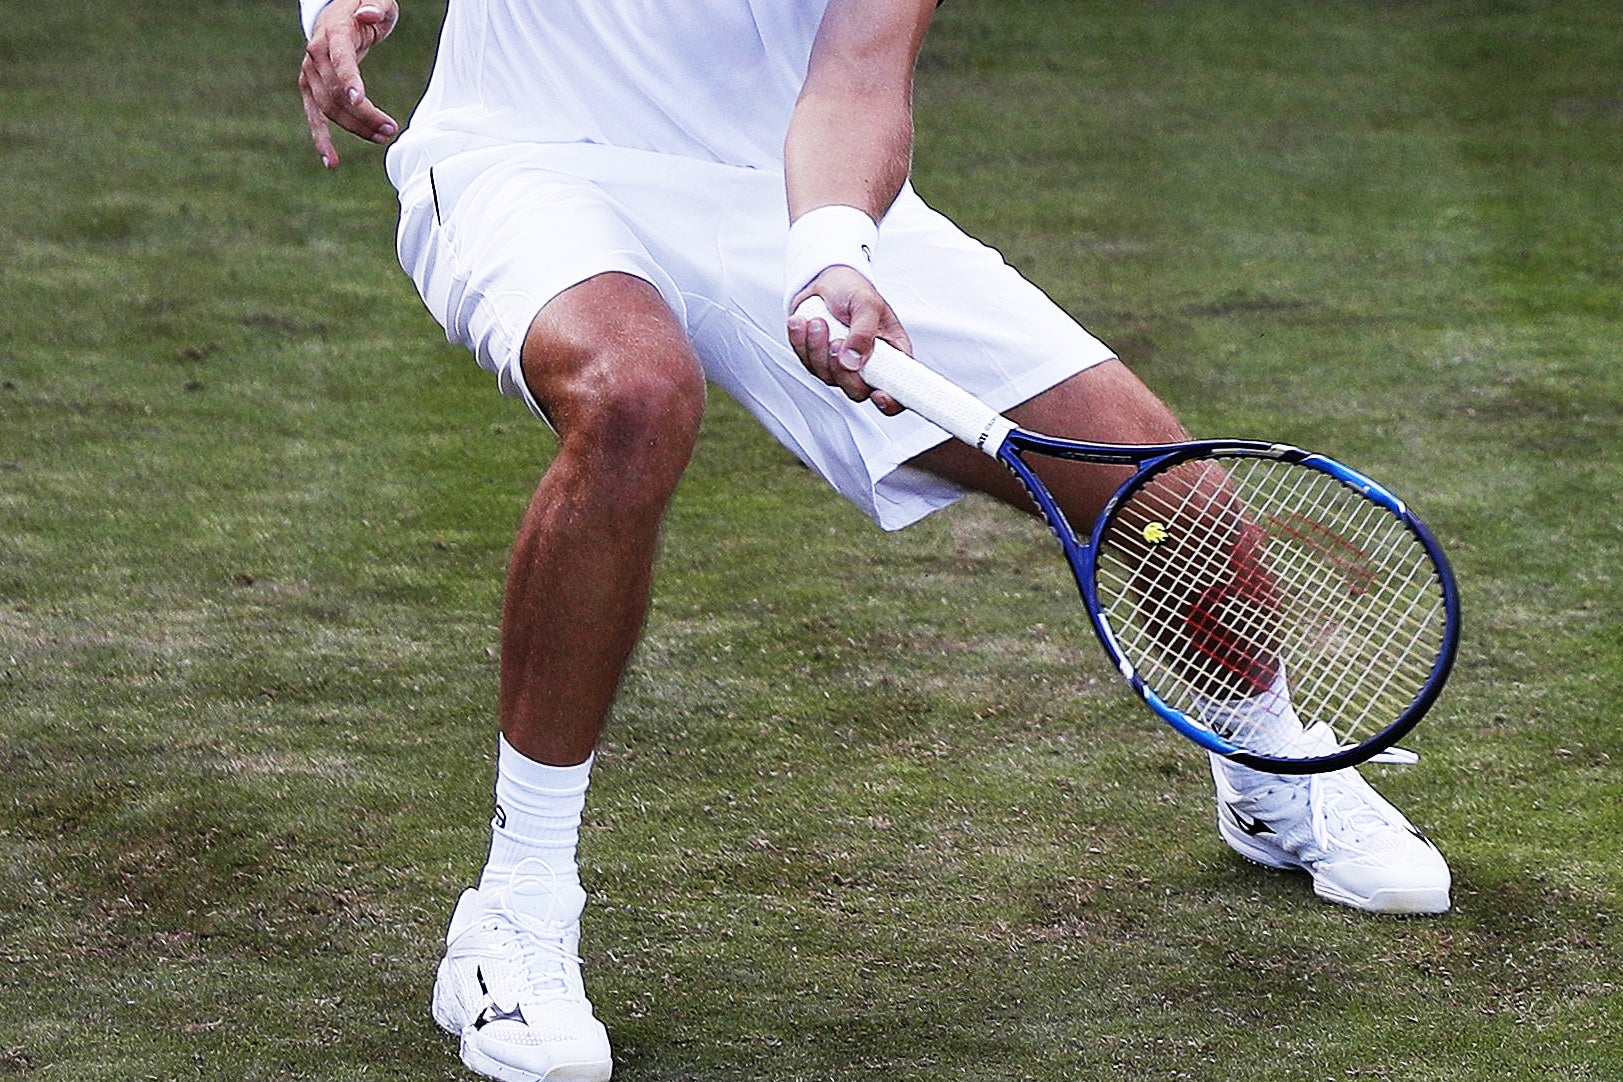 Luxembourg’s Gilles Müller at this year's Wimbledon (AFP/Getty)